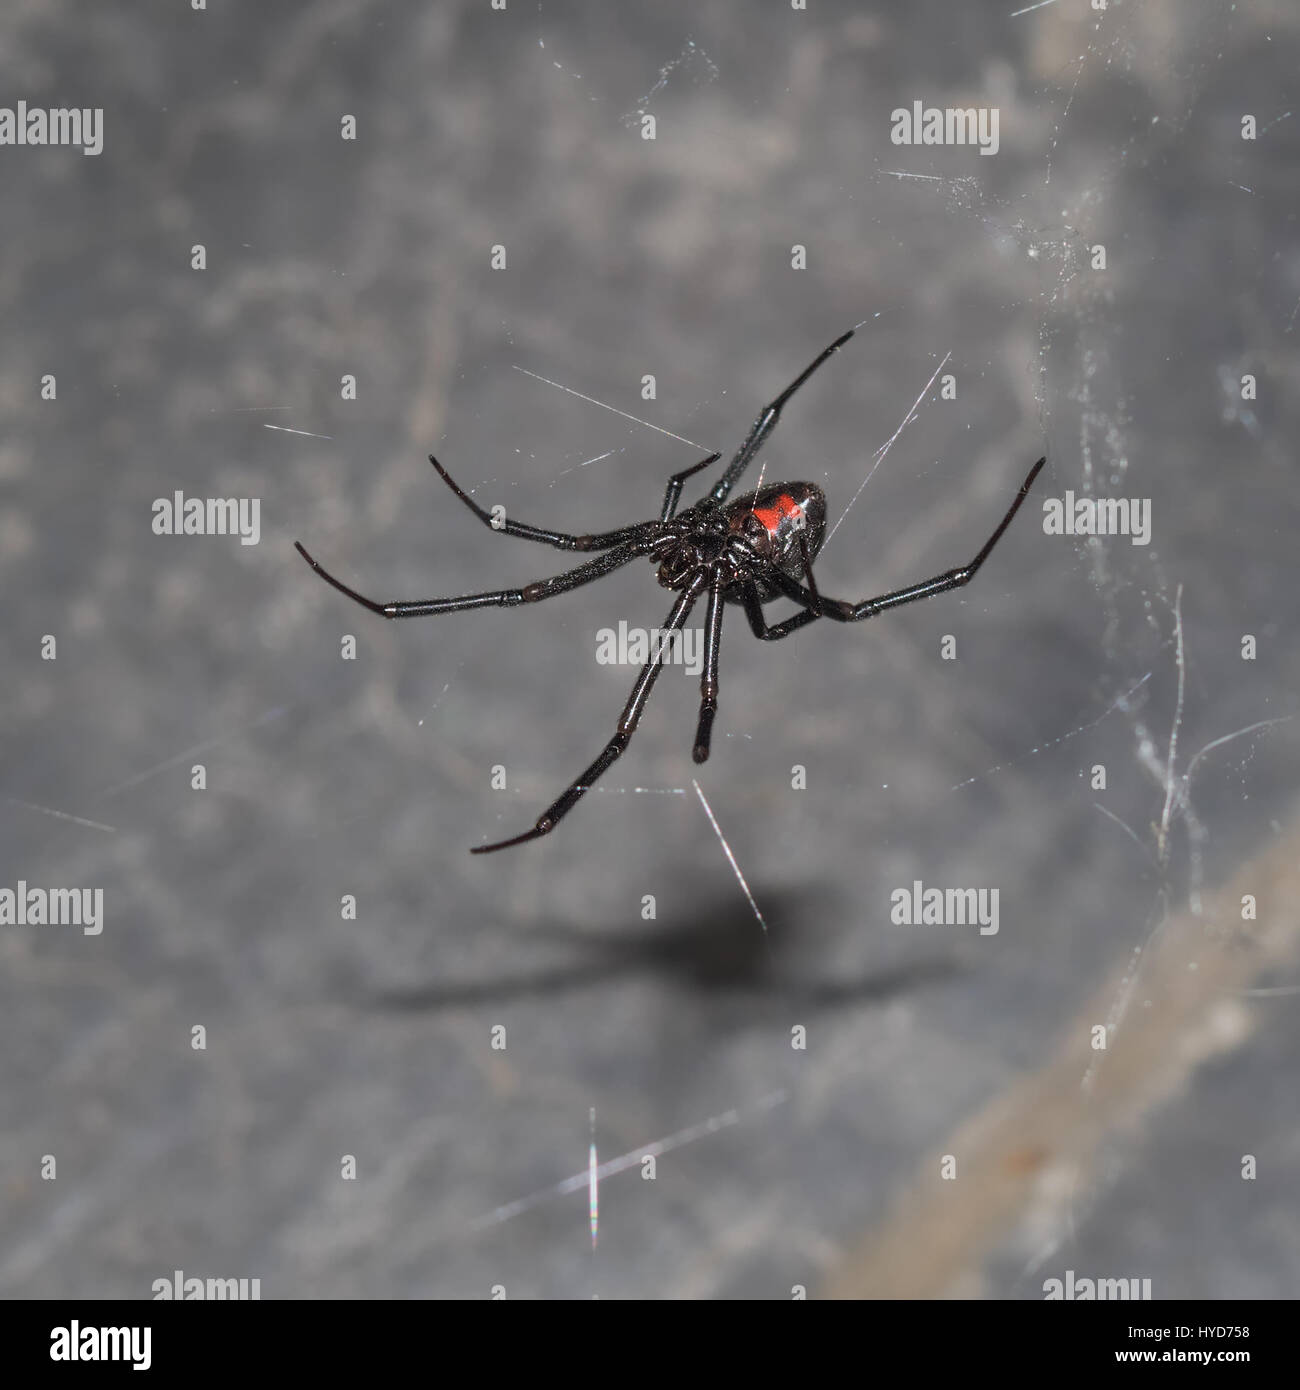 A largely misunderstood and harmless creature, black widows never bite unless squished along the length of their body. They are natural pest control. Stock Photo